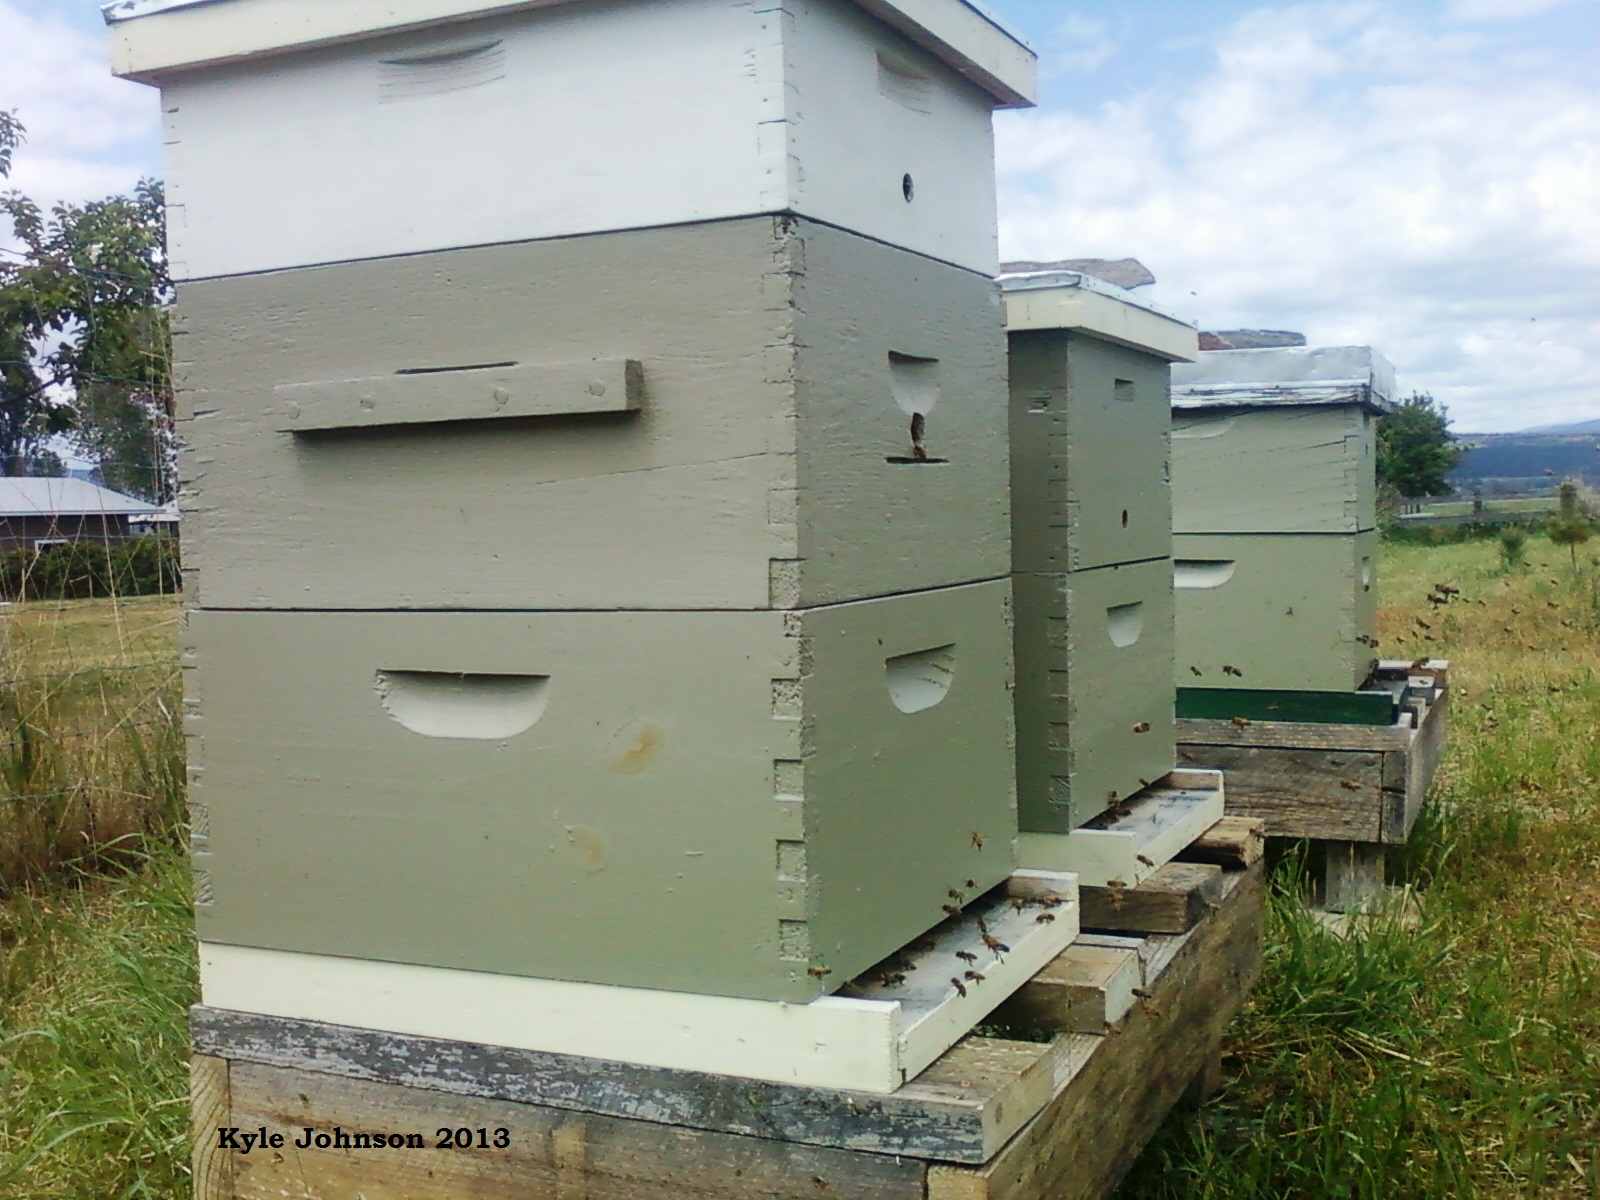 Langstroth Hive My langstroth hives